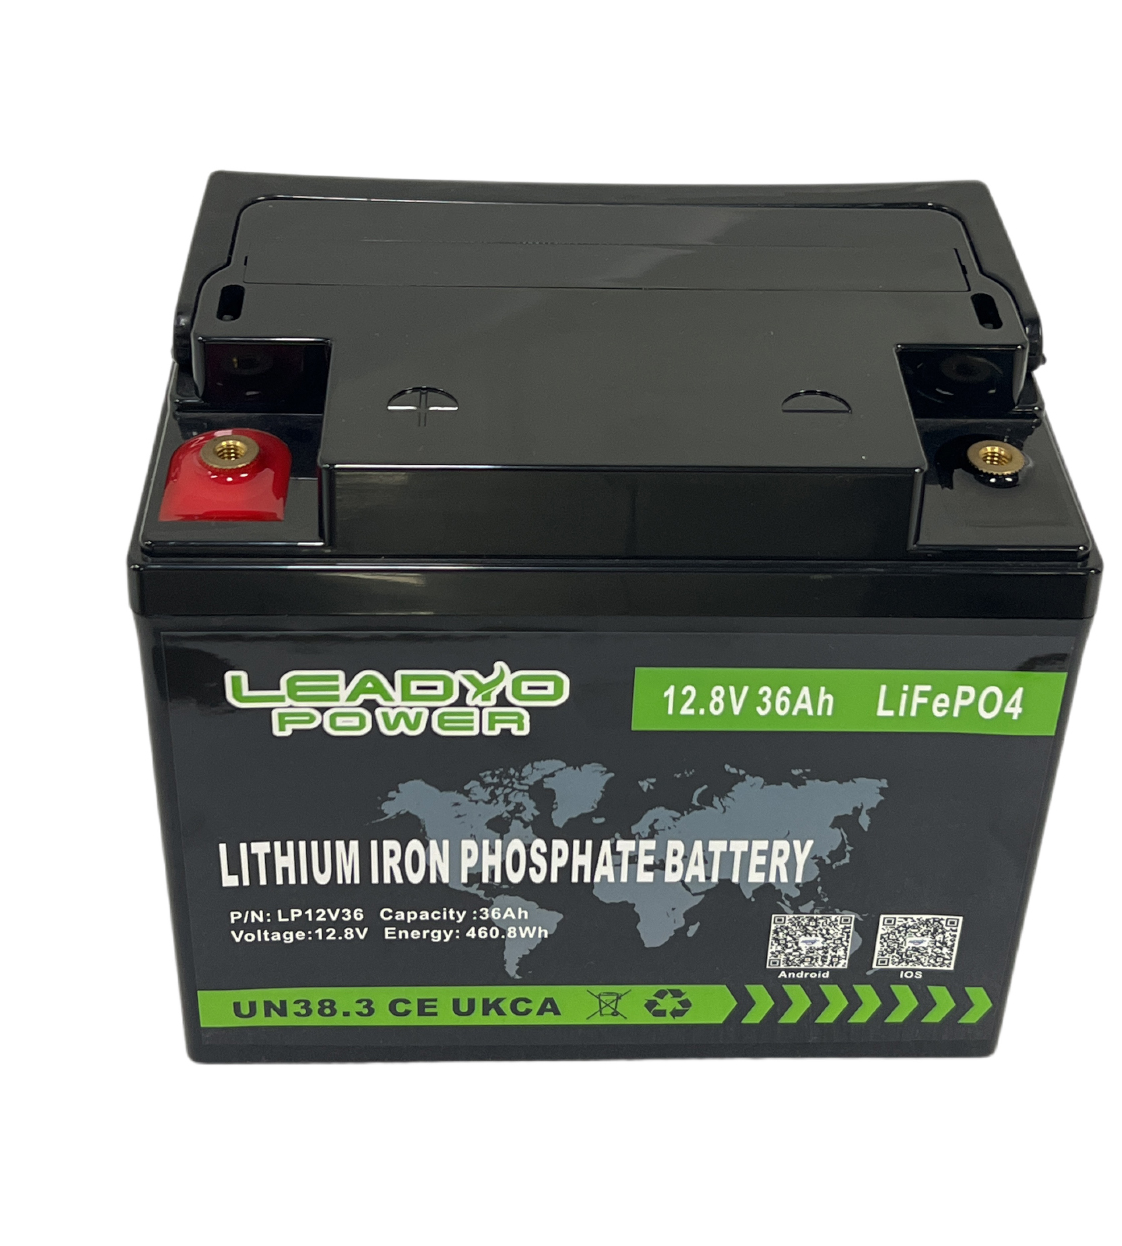 Power Your Journey with Leadyo's Advanced LiFePO4 Battery Solutions